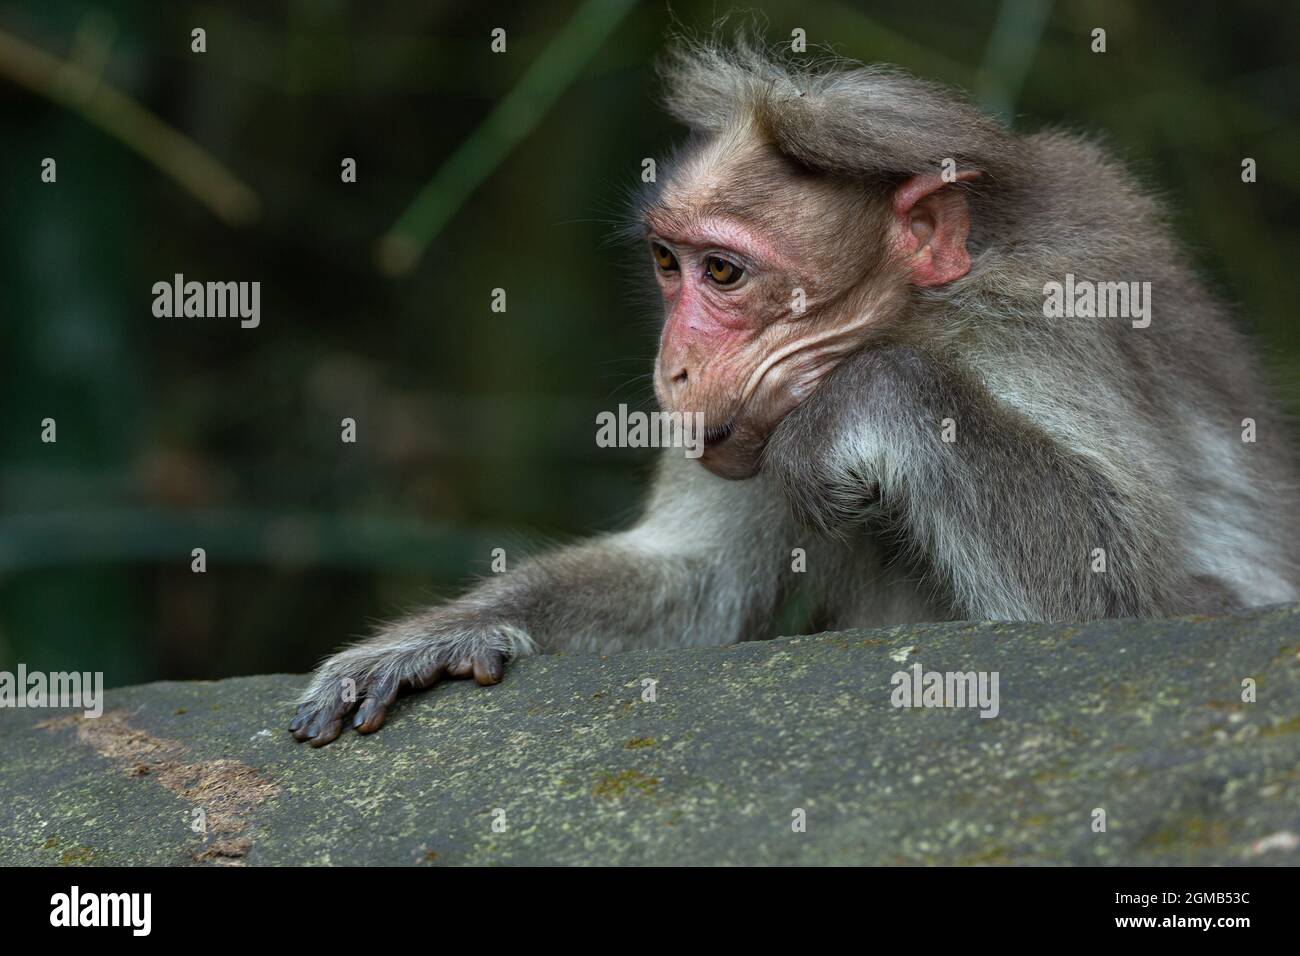 A monkey is looking over the wall, resting his head on his hand, forming wrinkles on his face. Stock Photo